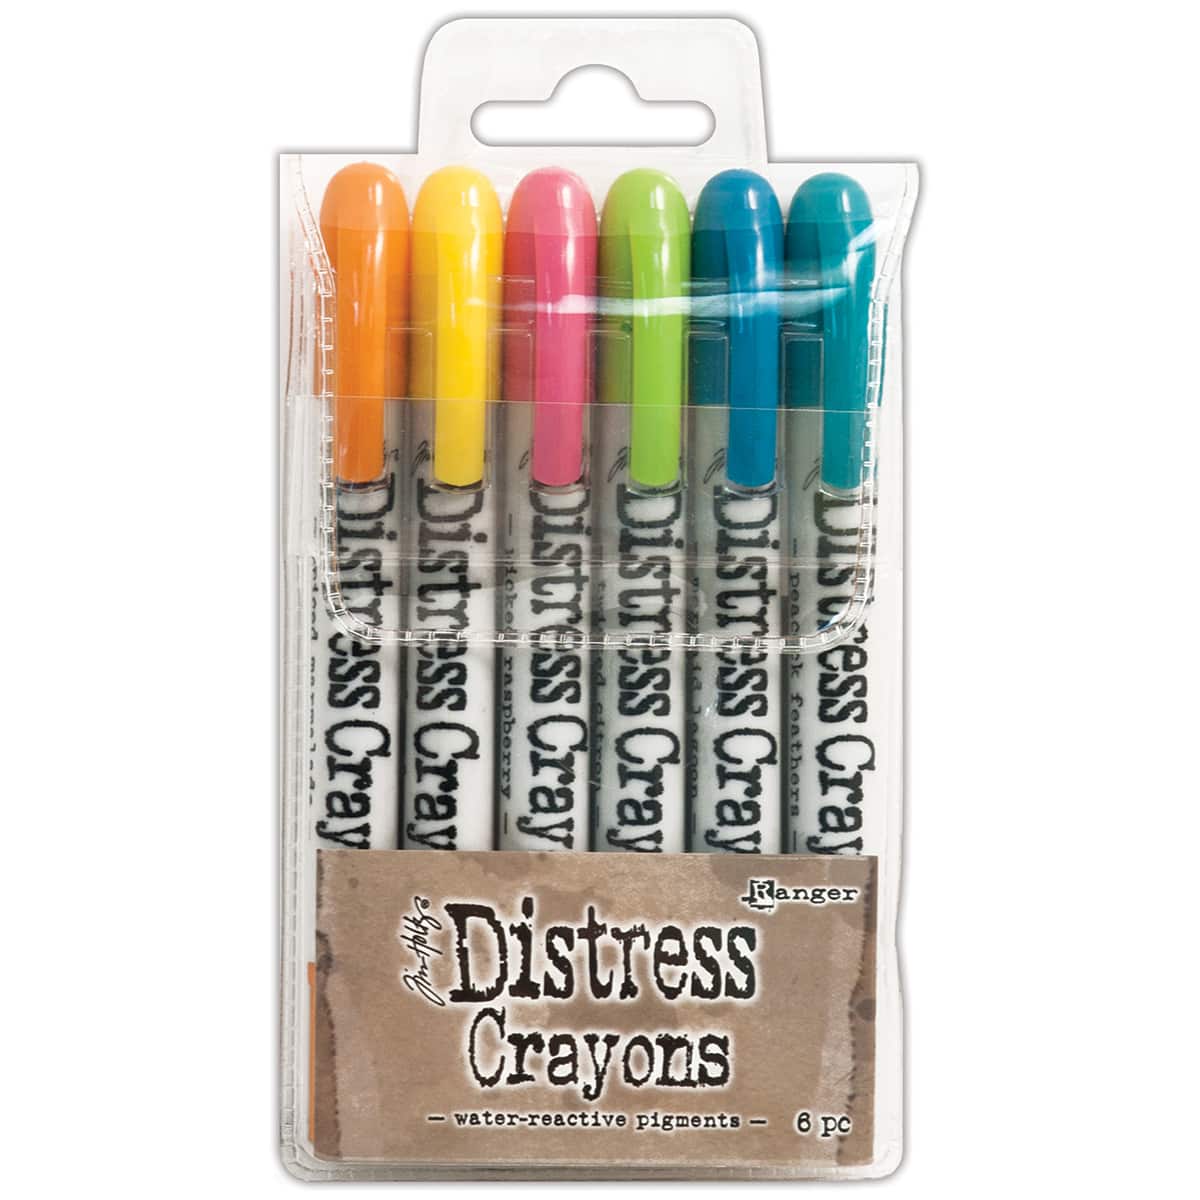 Distress Crayons Care Package Project